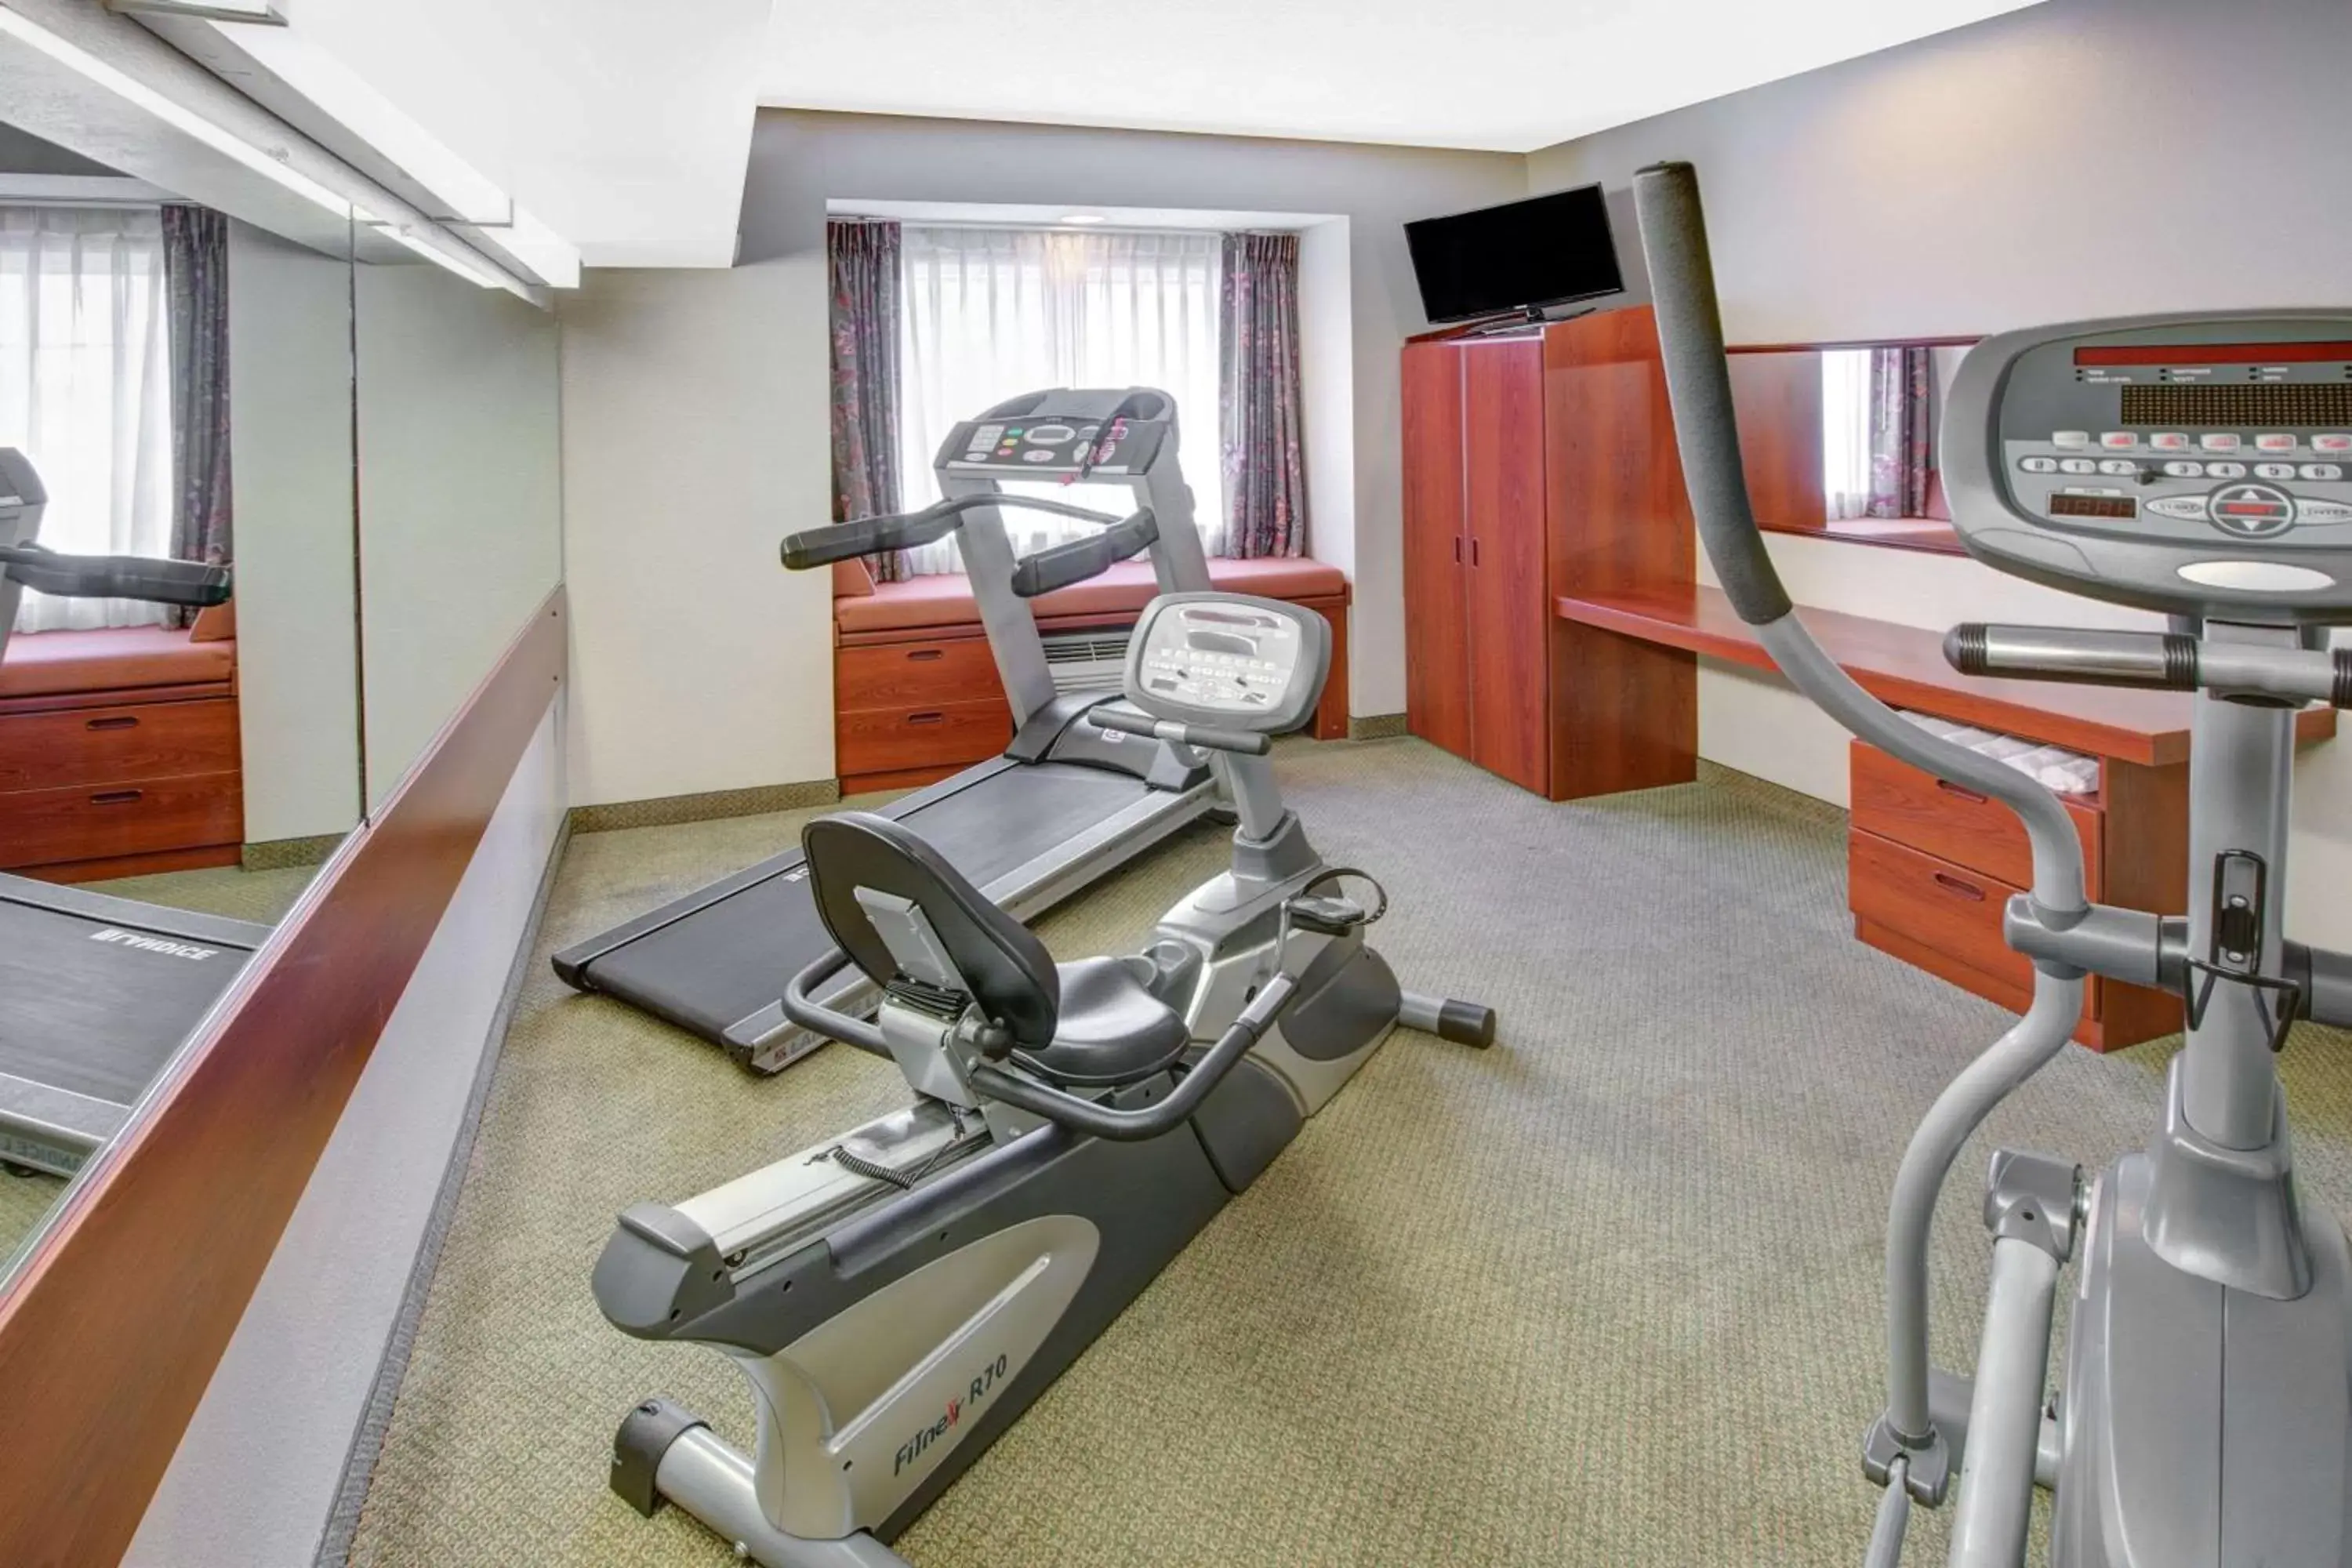 Fitness centre/facilities, Fitness Center/Facilities in Microtel Inn & Suites by Wyndham Hattiesburg